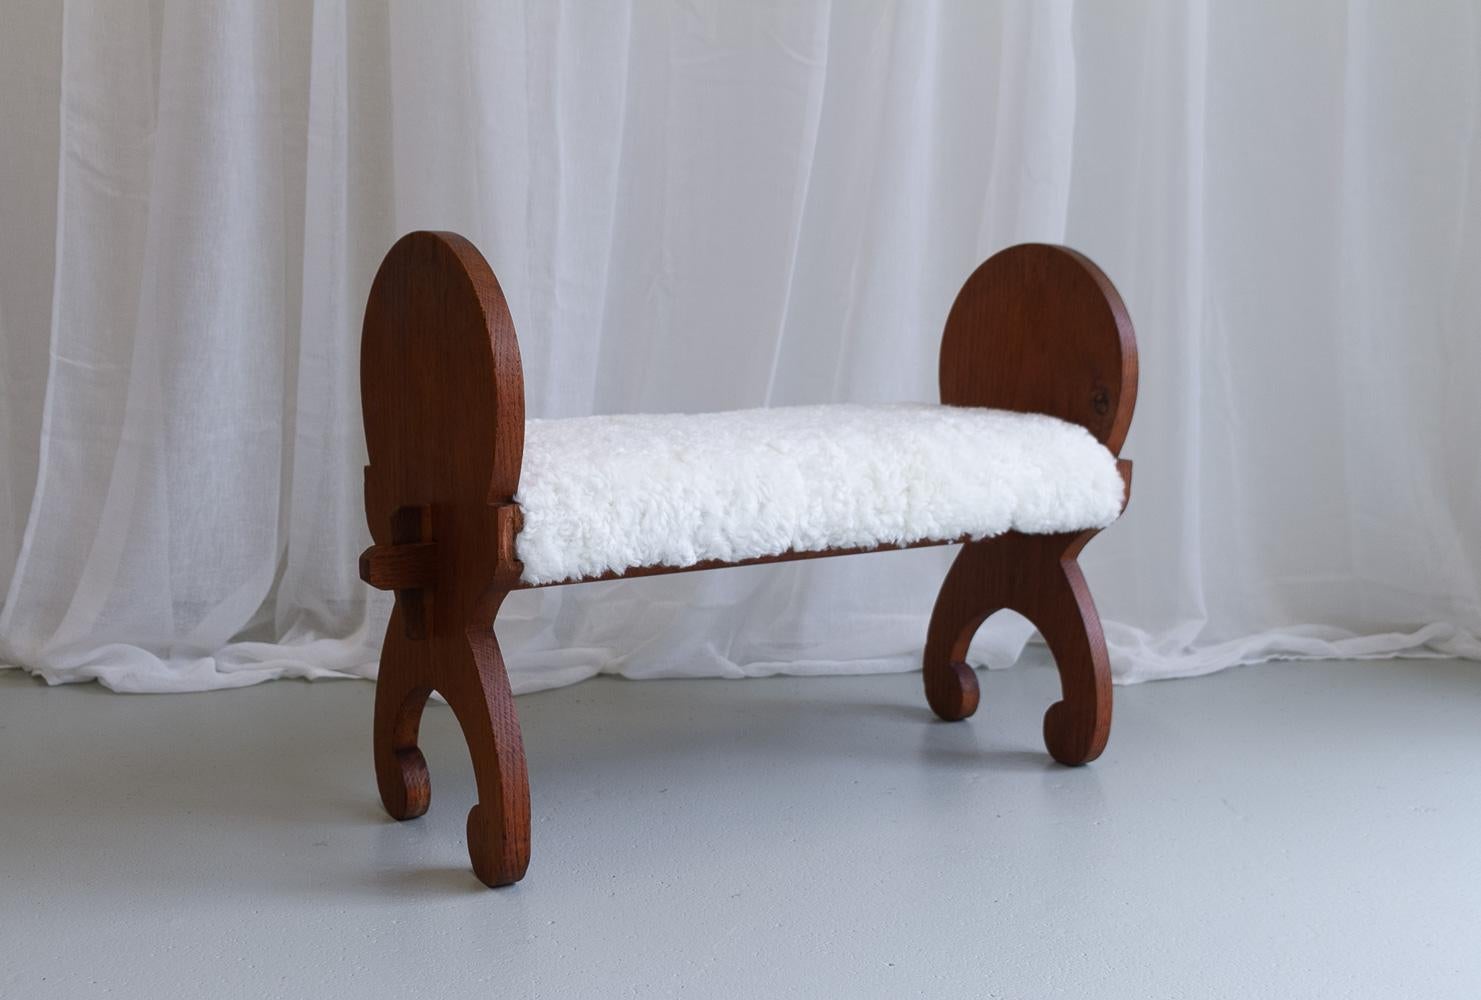 Vintage Danish Oak Stool with Lambskin, ca 1900s.
Antique stool in solid oak from Denmark early 20th century. Inspired by the medieval or viking era. Probably used as a footstool or a childrens bench. 

Seat has been re-upholstered with new white